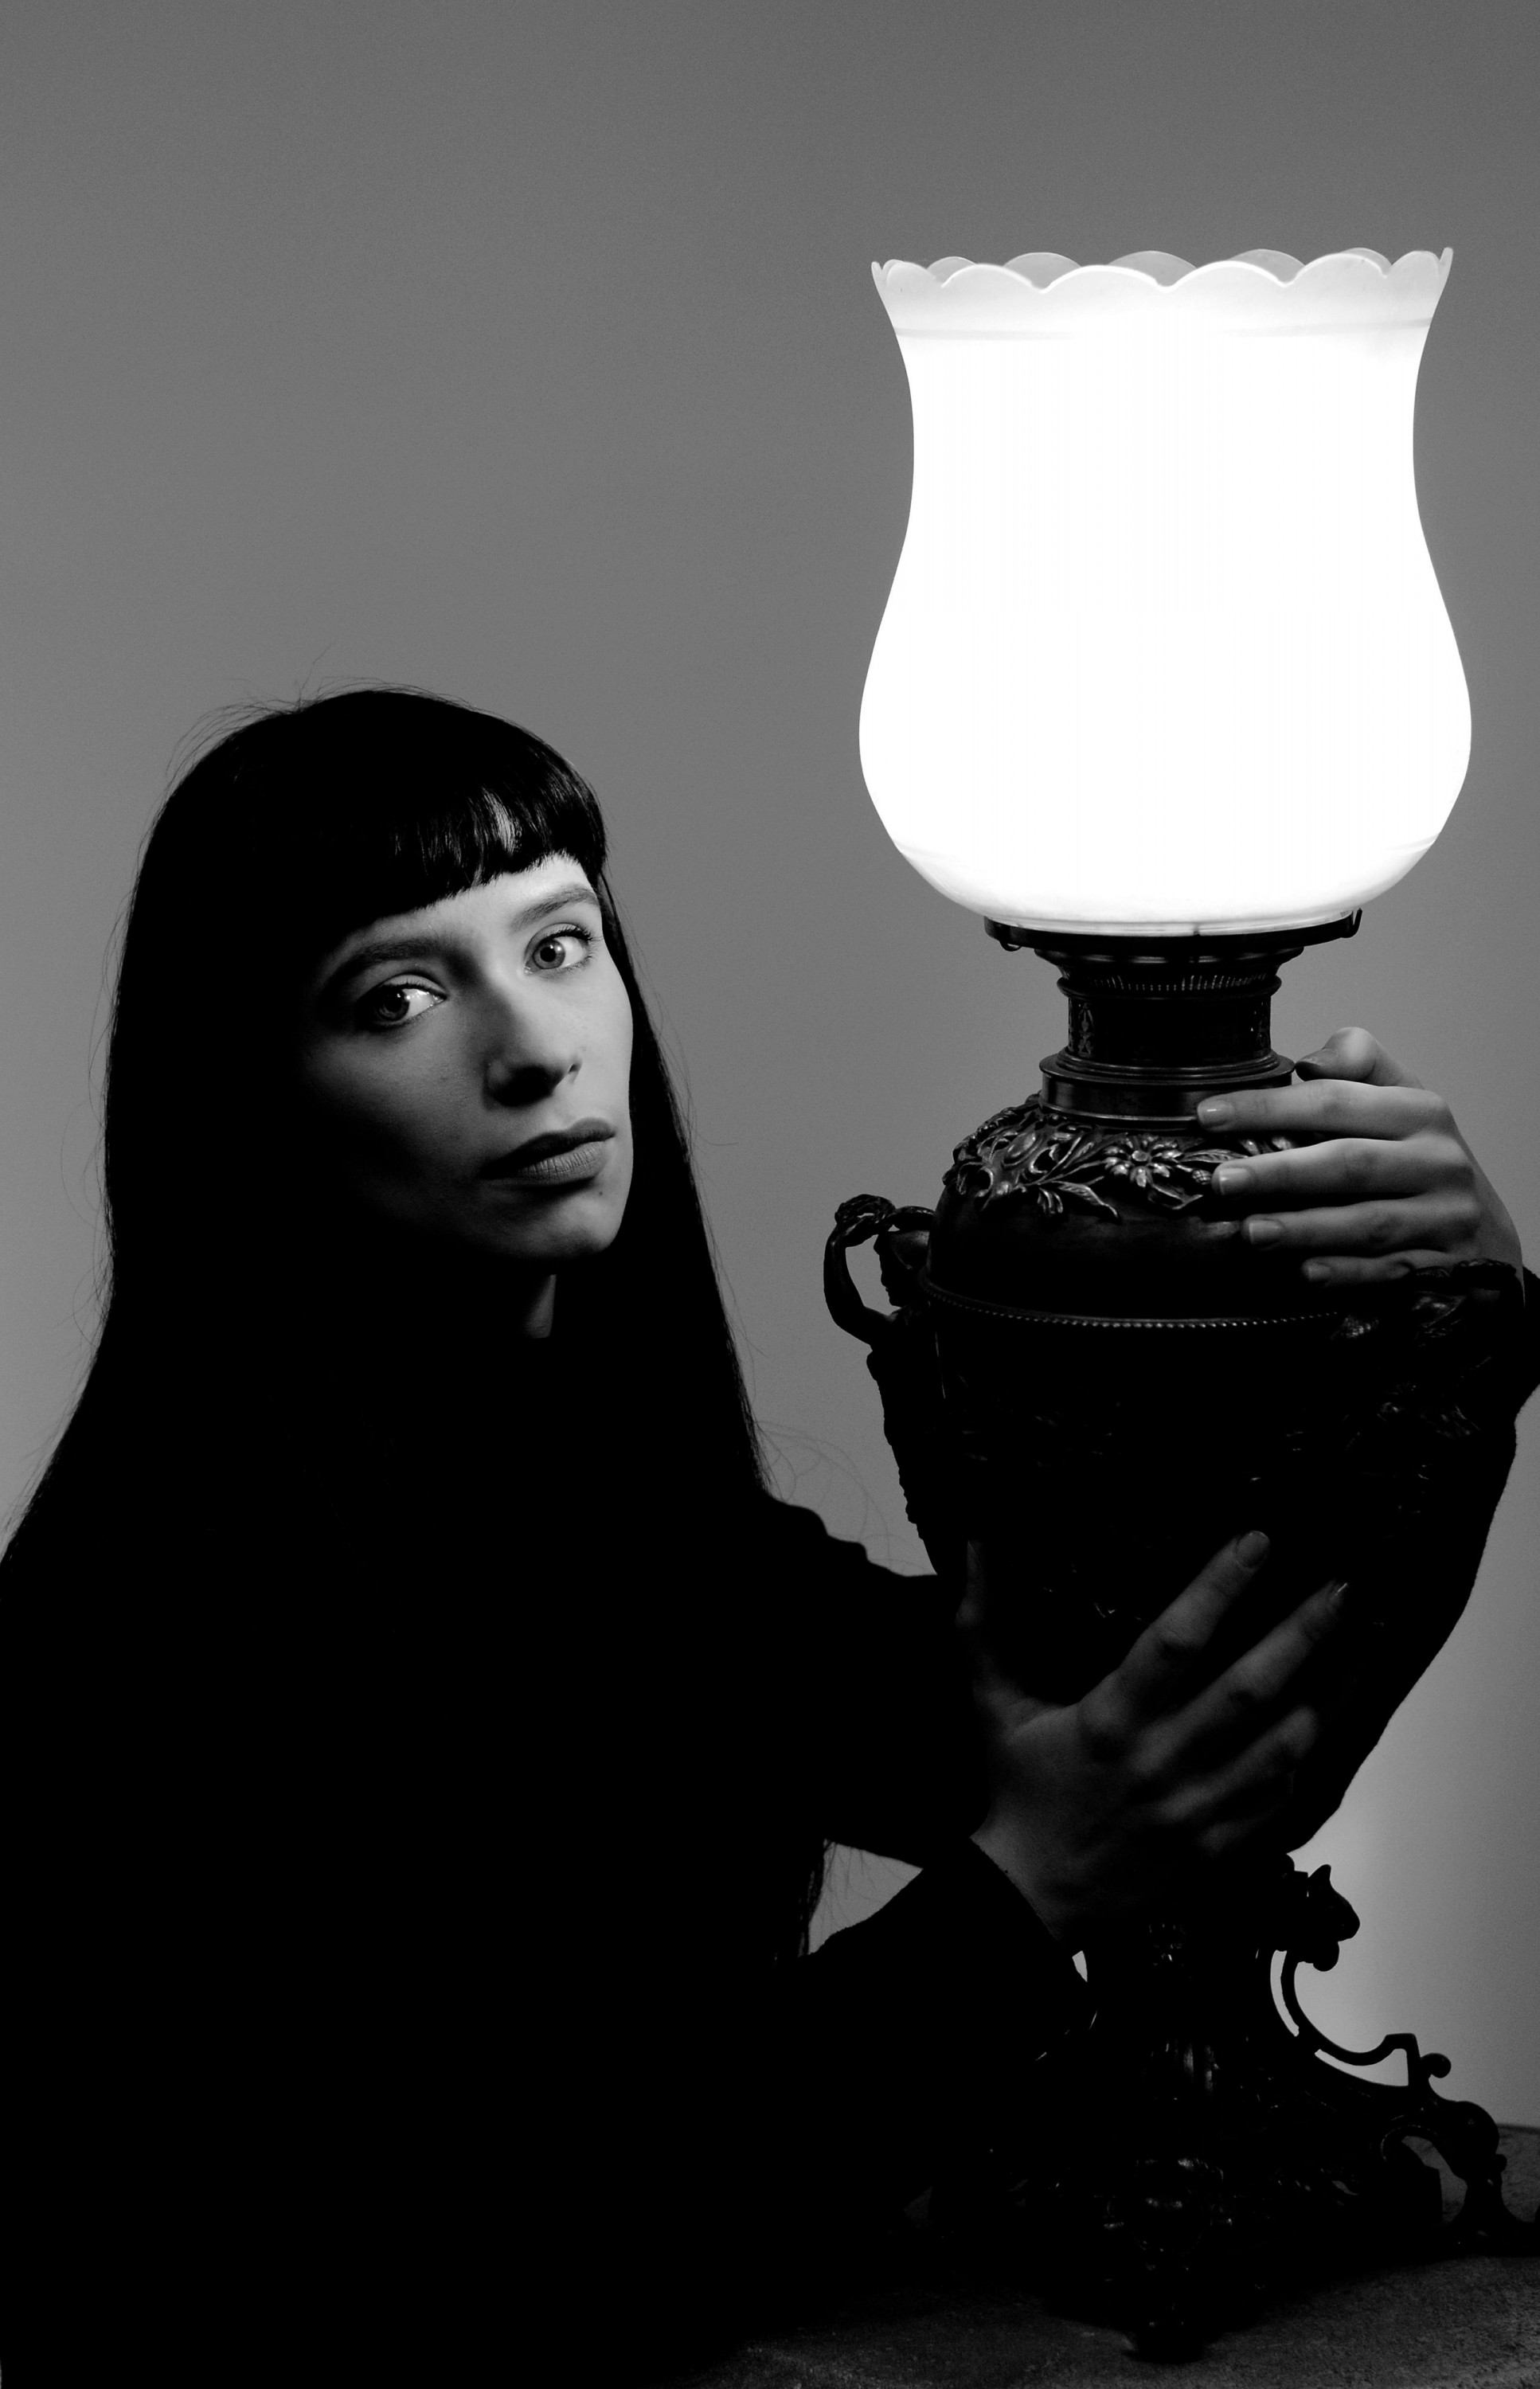 Girl with lamp